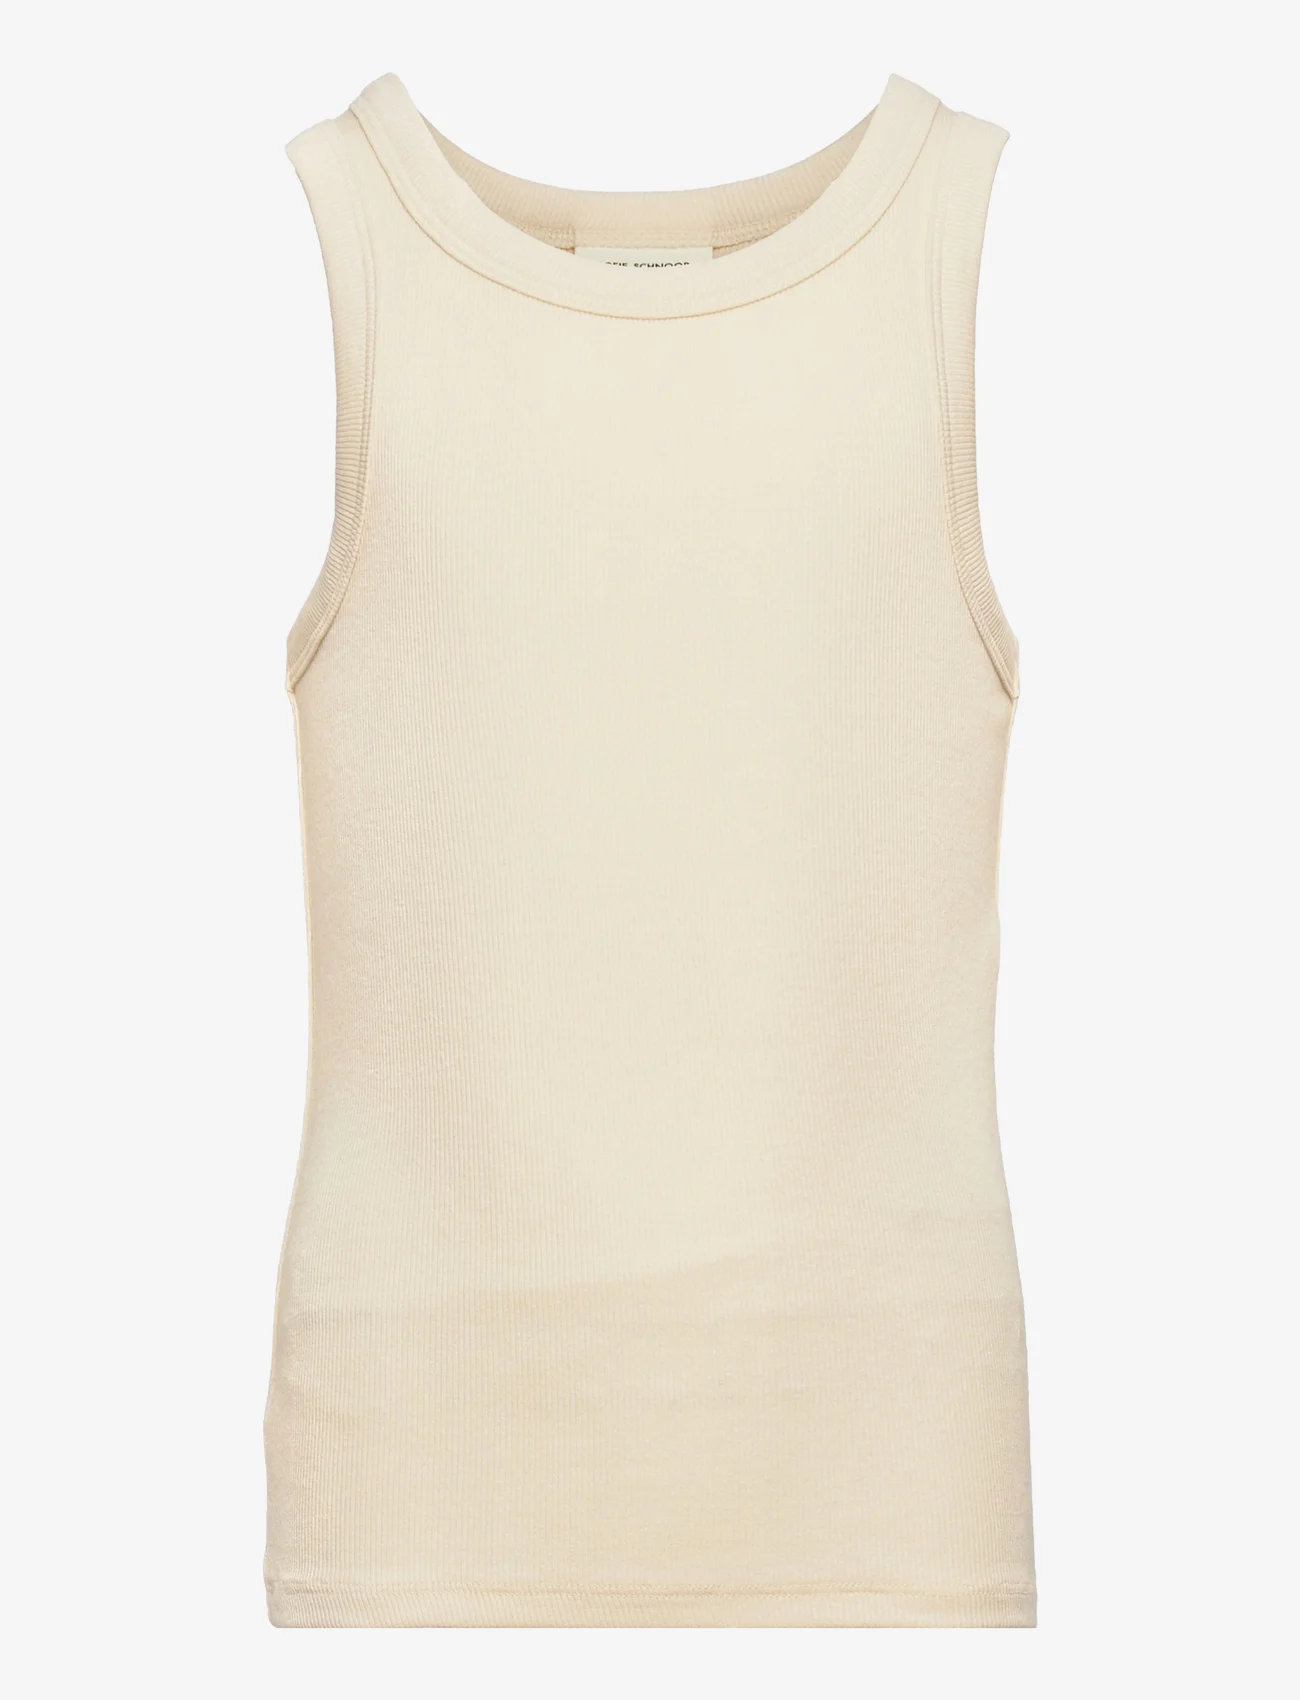 Sofie Schnoor Baby and Kids - Top - sleeveless - antique white - 0